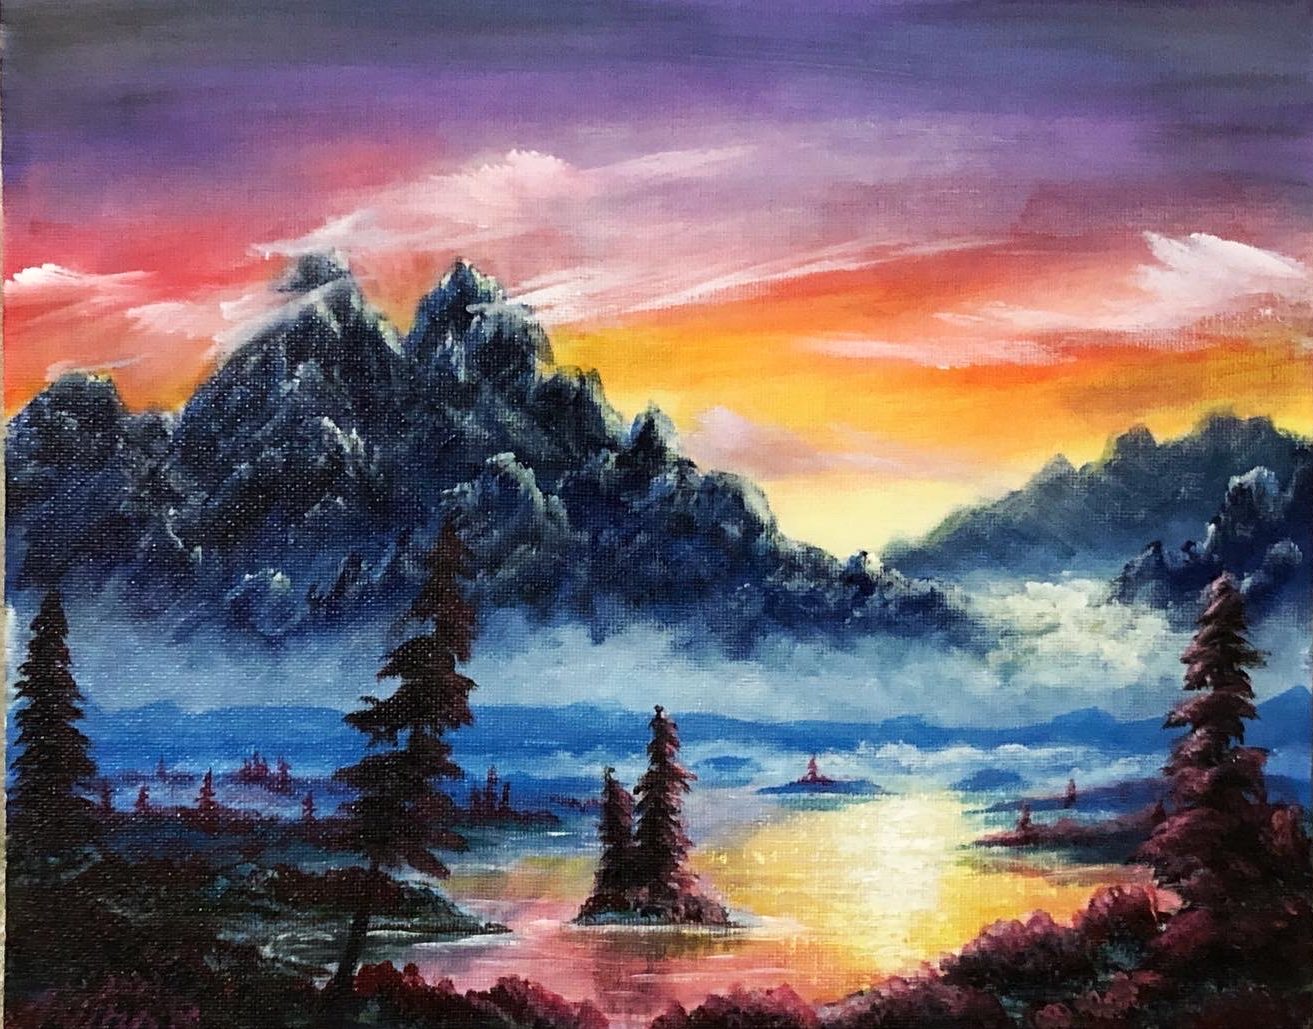 Acrylic painting of mountains and lake.